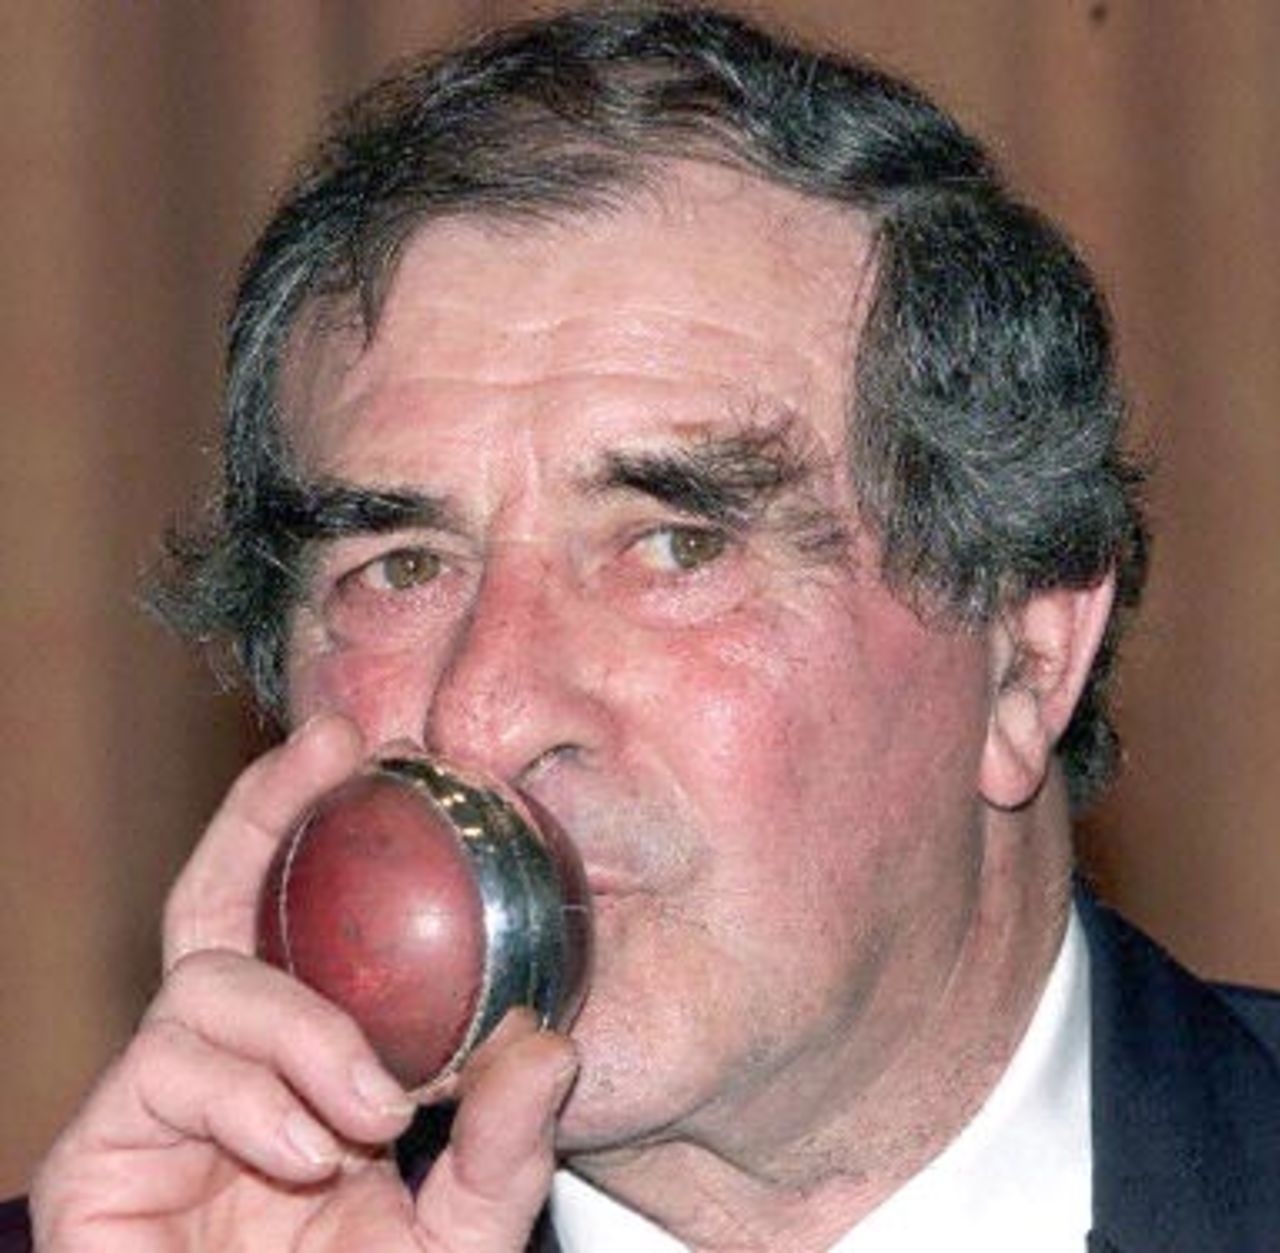 English cricket legend Fred Trueman tosses the cricket ball that he achieved his three hundreth test wicket against the West Indies in 1963, 06 February 2001, at the Grosvenor House in London. Trueman is guest of honour at his 70th birthday, where all his cricket possessions are to be auctioned.